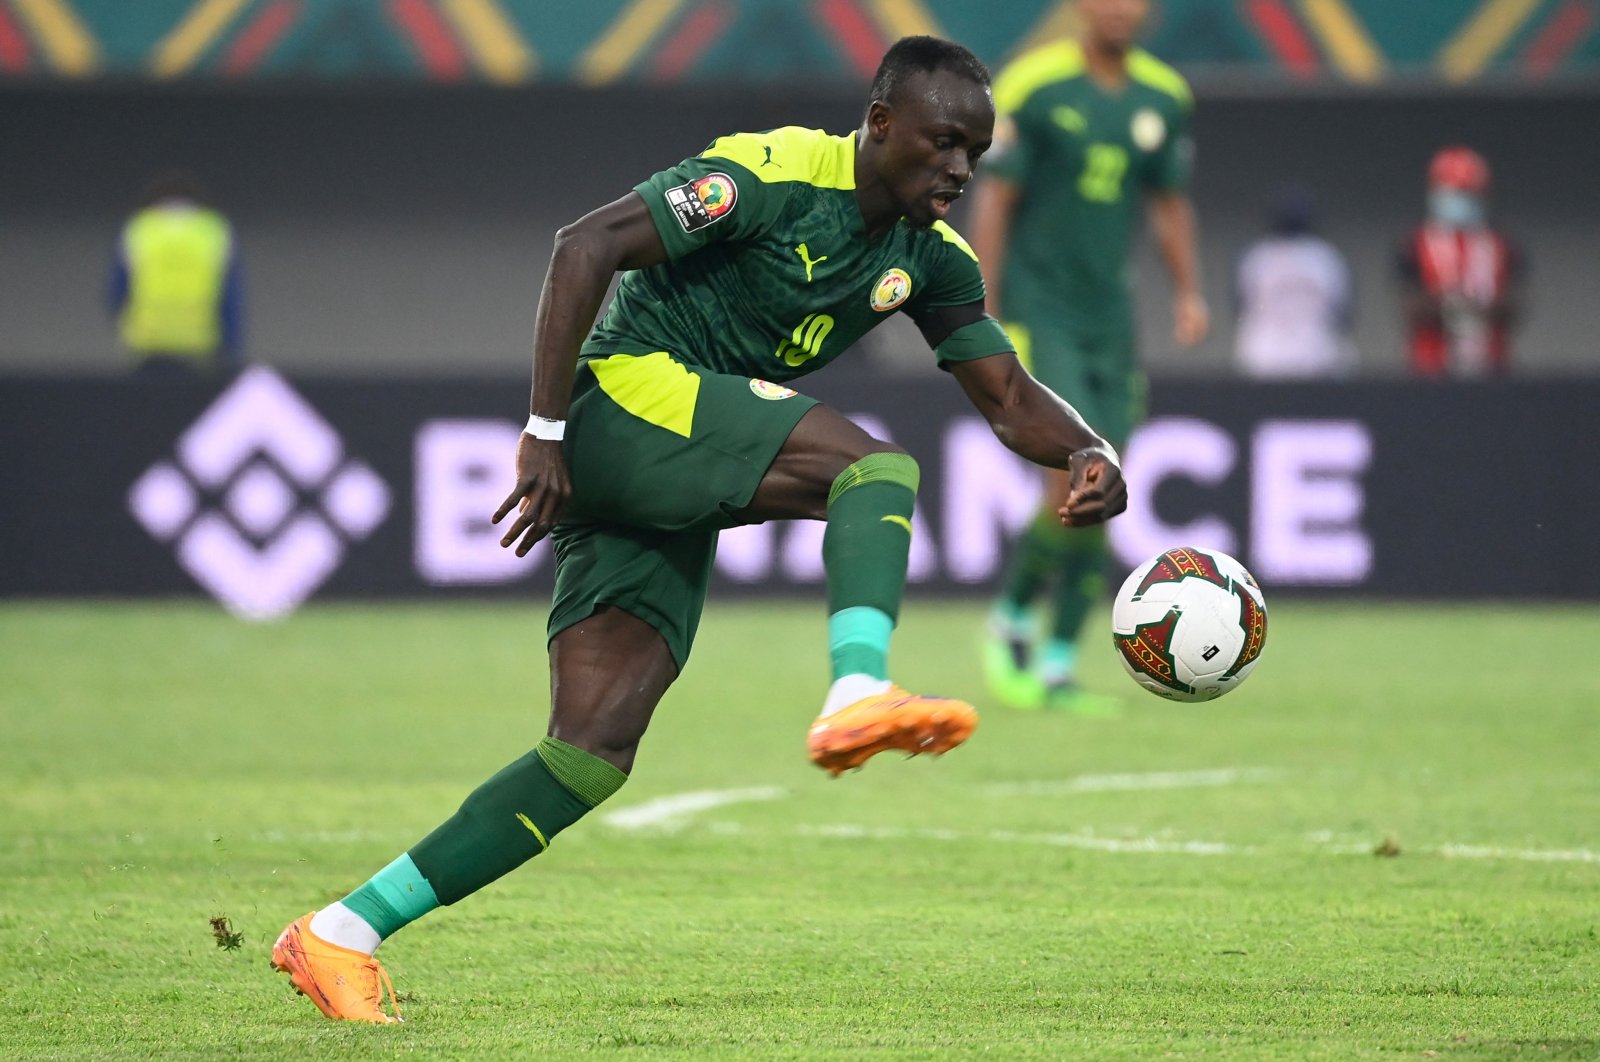 Senegal forward Sadio Mane controls the ball during an AFCON match against Cape Verde, Bafoussam, Cameroon, Jan. 25, 2022. (AFP Photo)